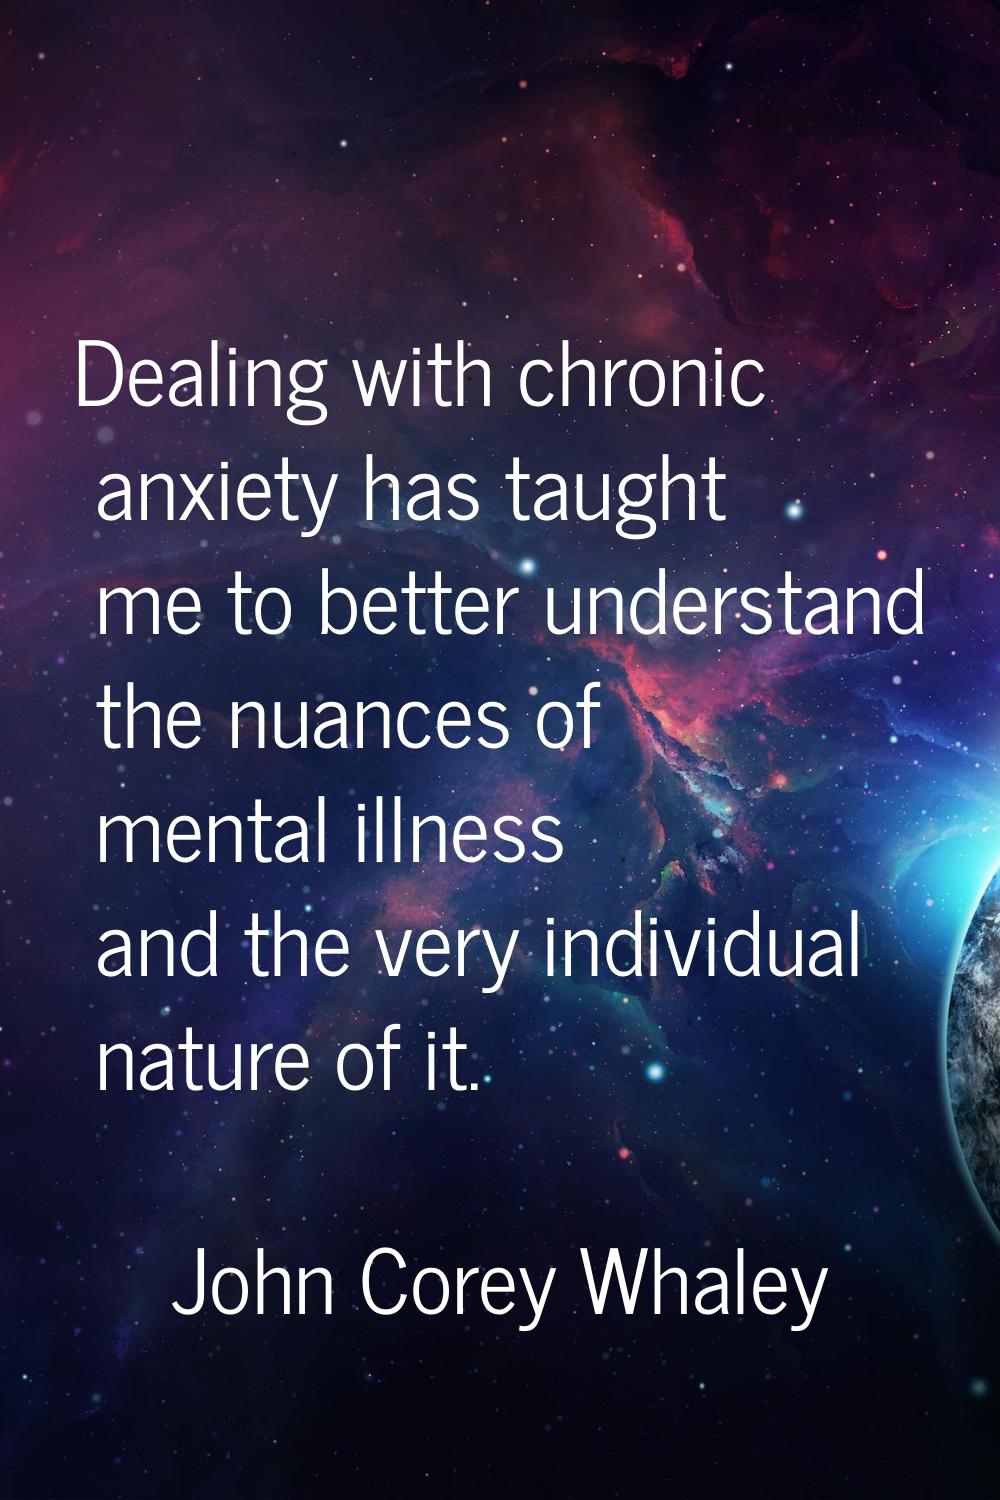 Dealing with chronic anxiety has taught me to better understand the nuances of mental illness and t